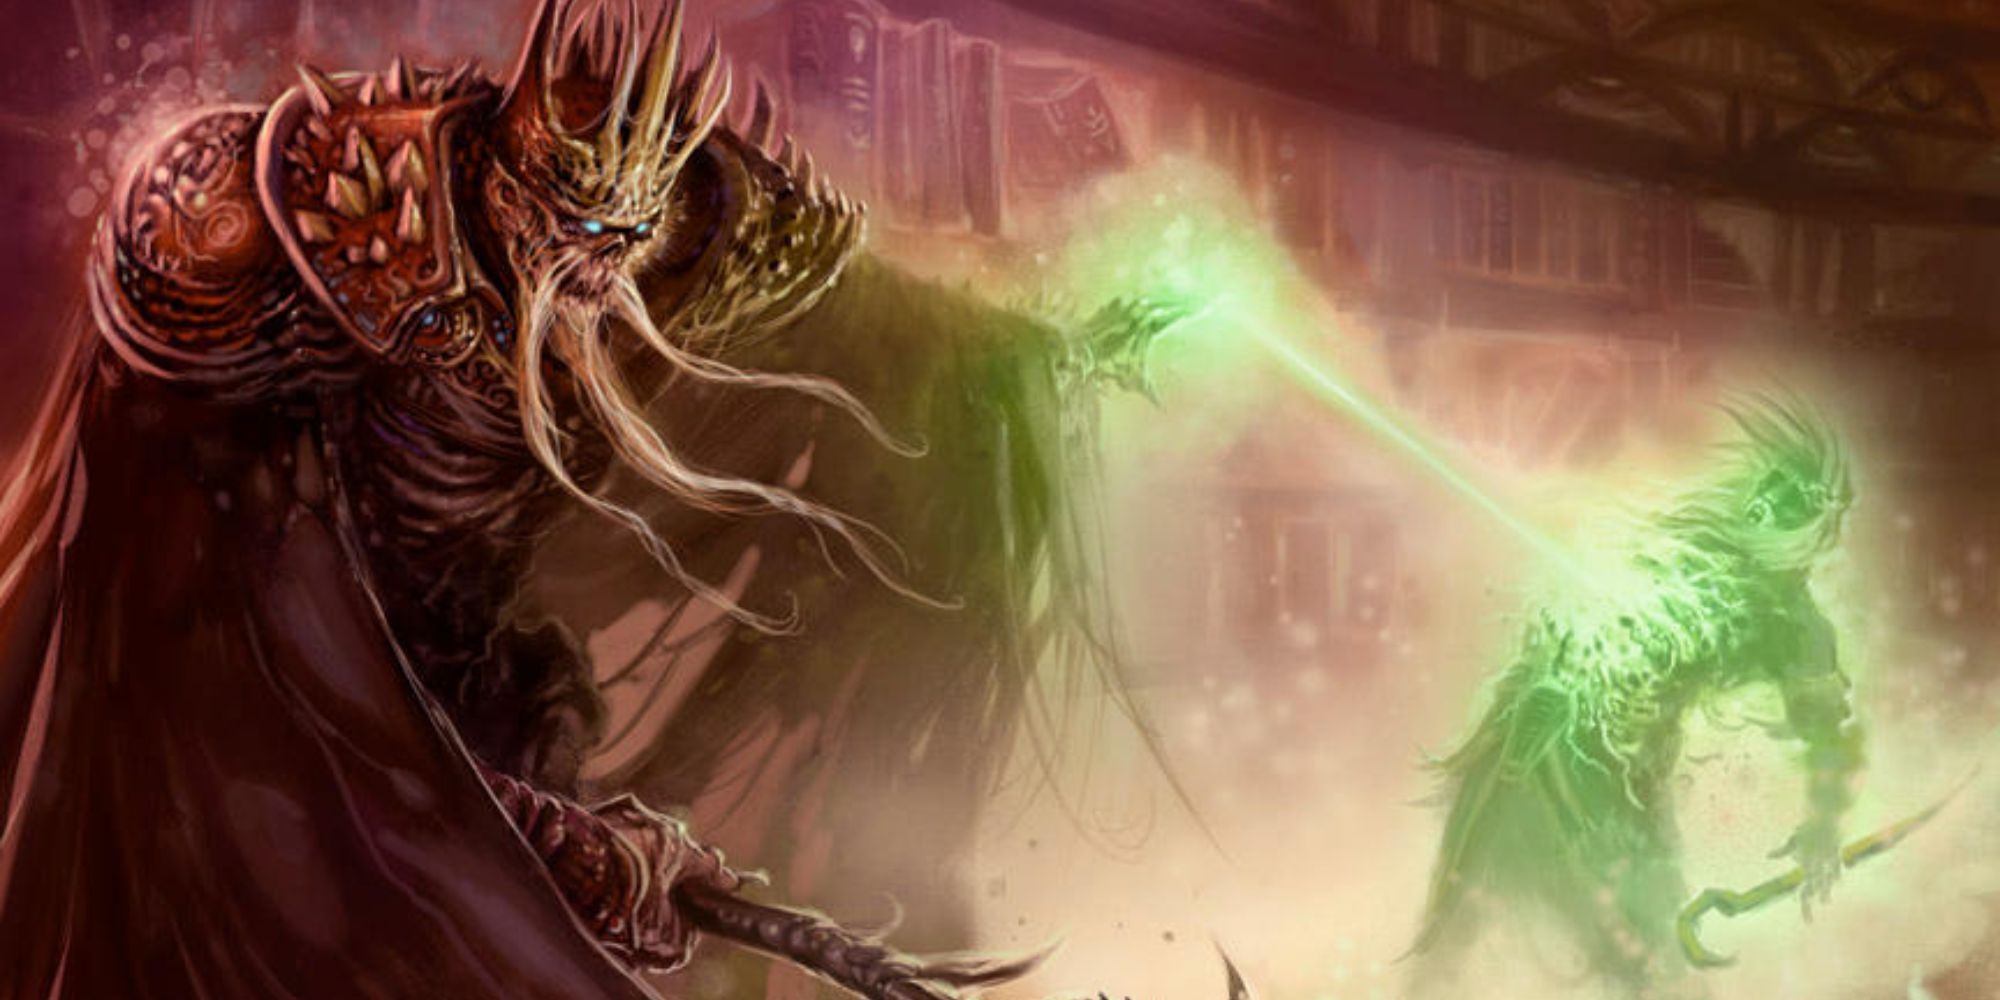 Pathfinder Lich Casting Spell WIth Green Ray Against Character